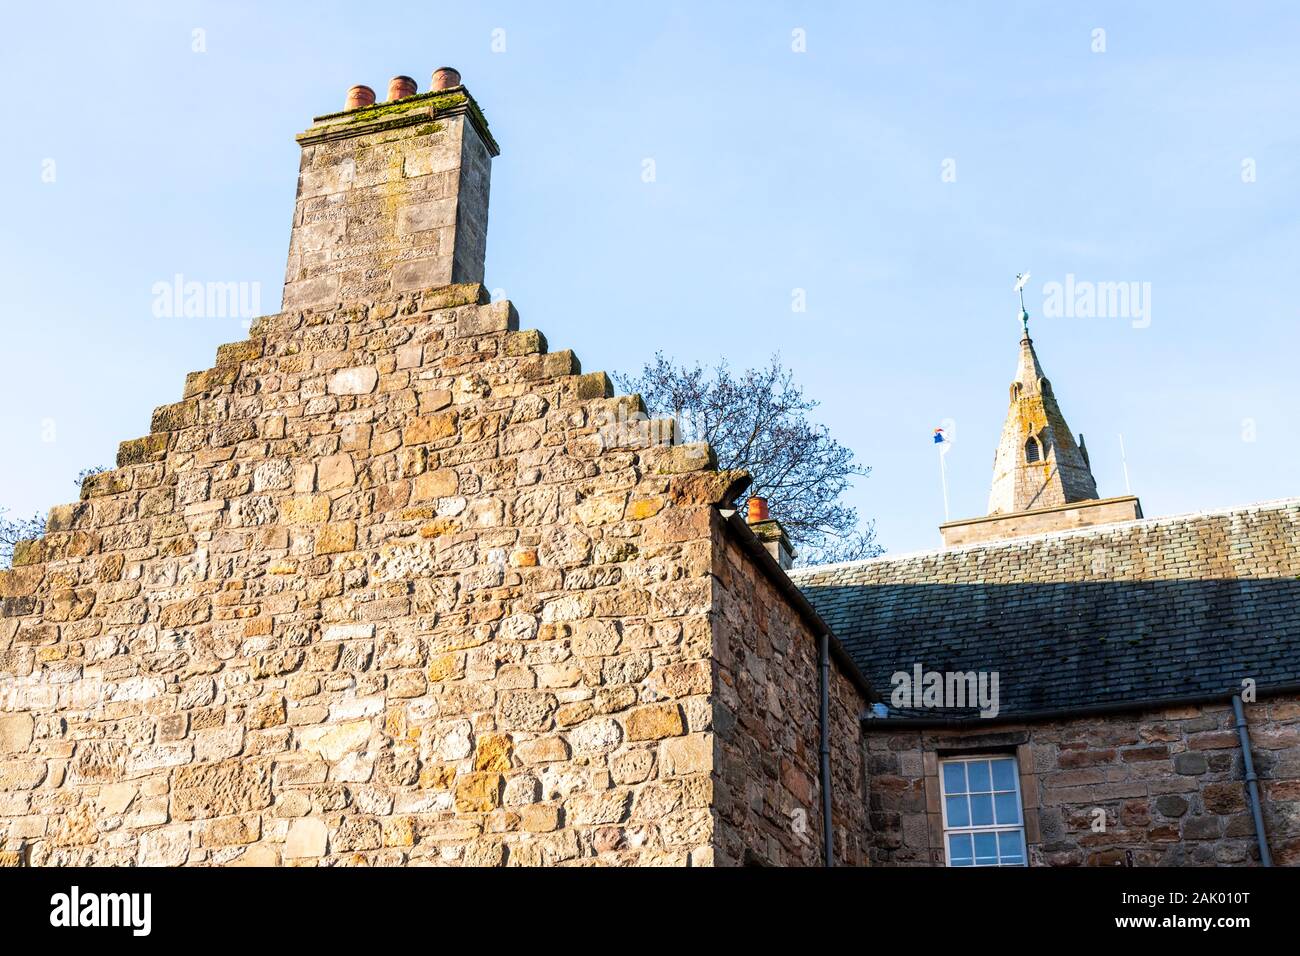 A gable wall with crowsteps on an old stone building in St Andrews, Fife, Scotland UK Stock Photo